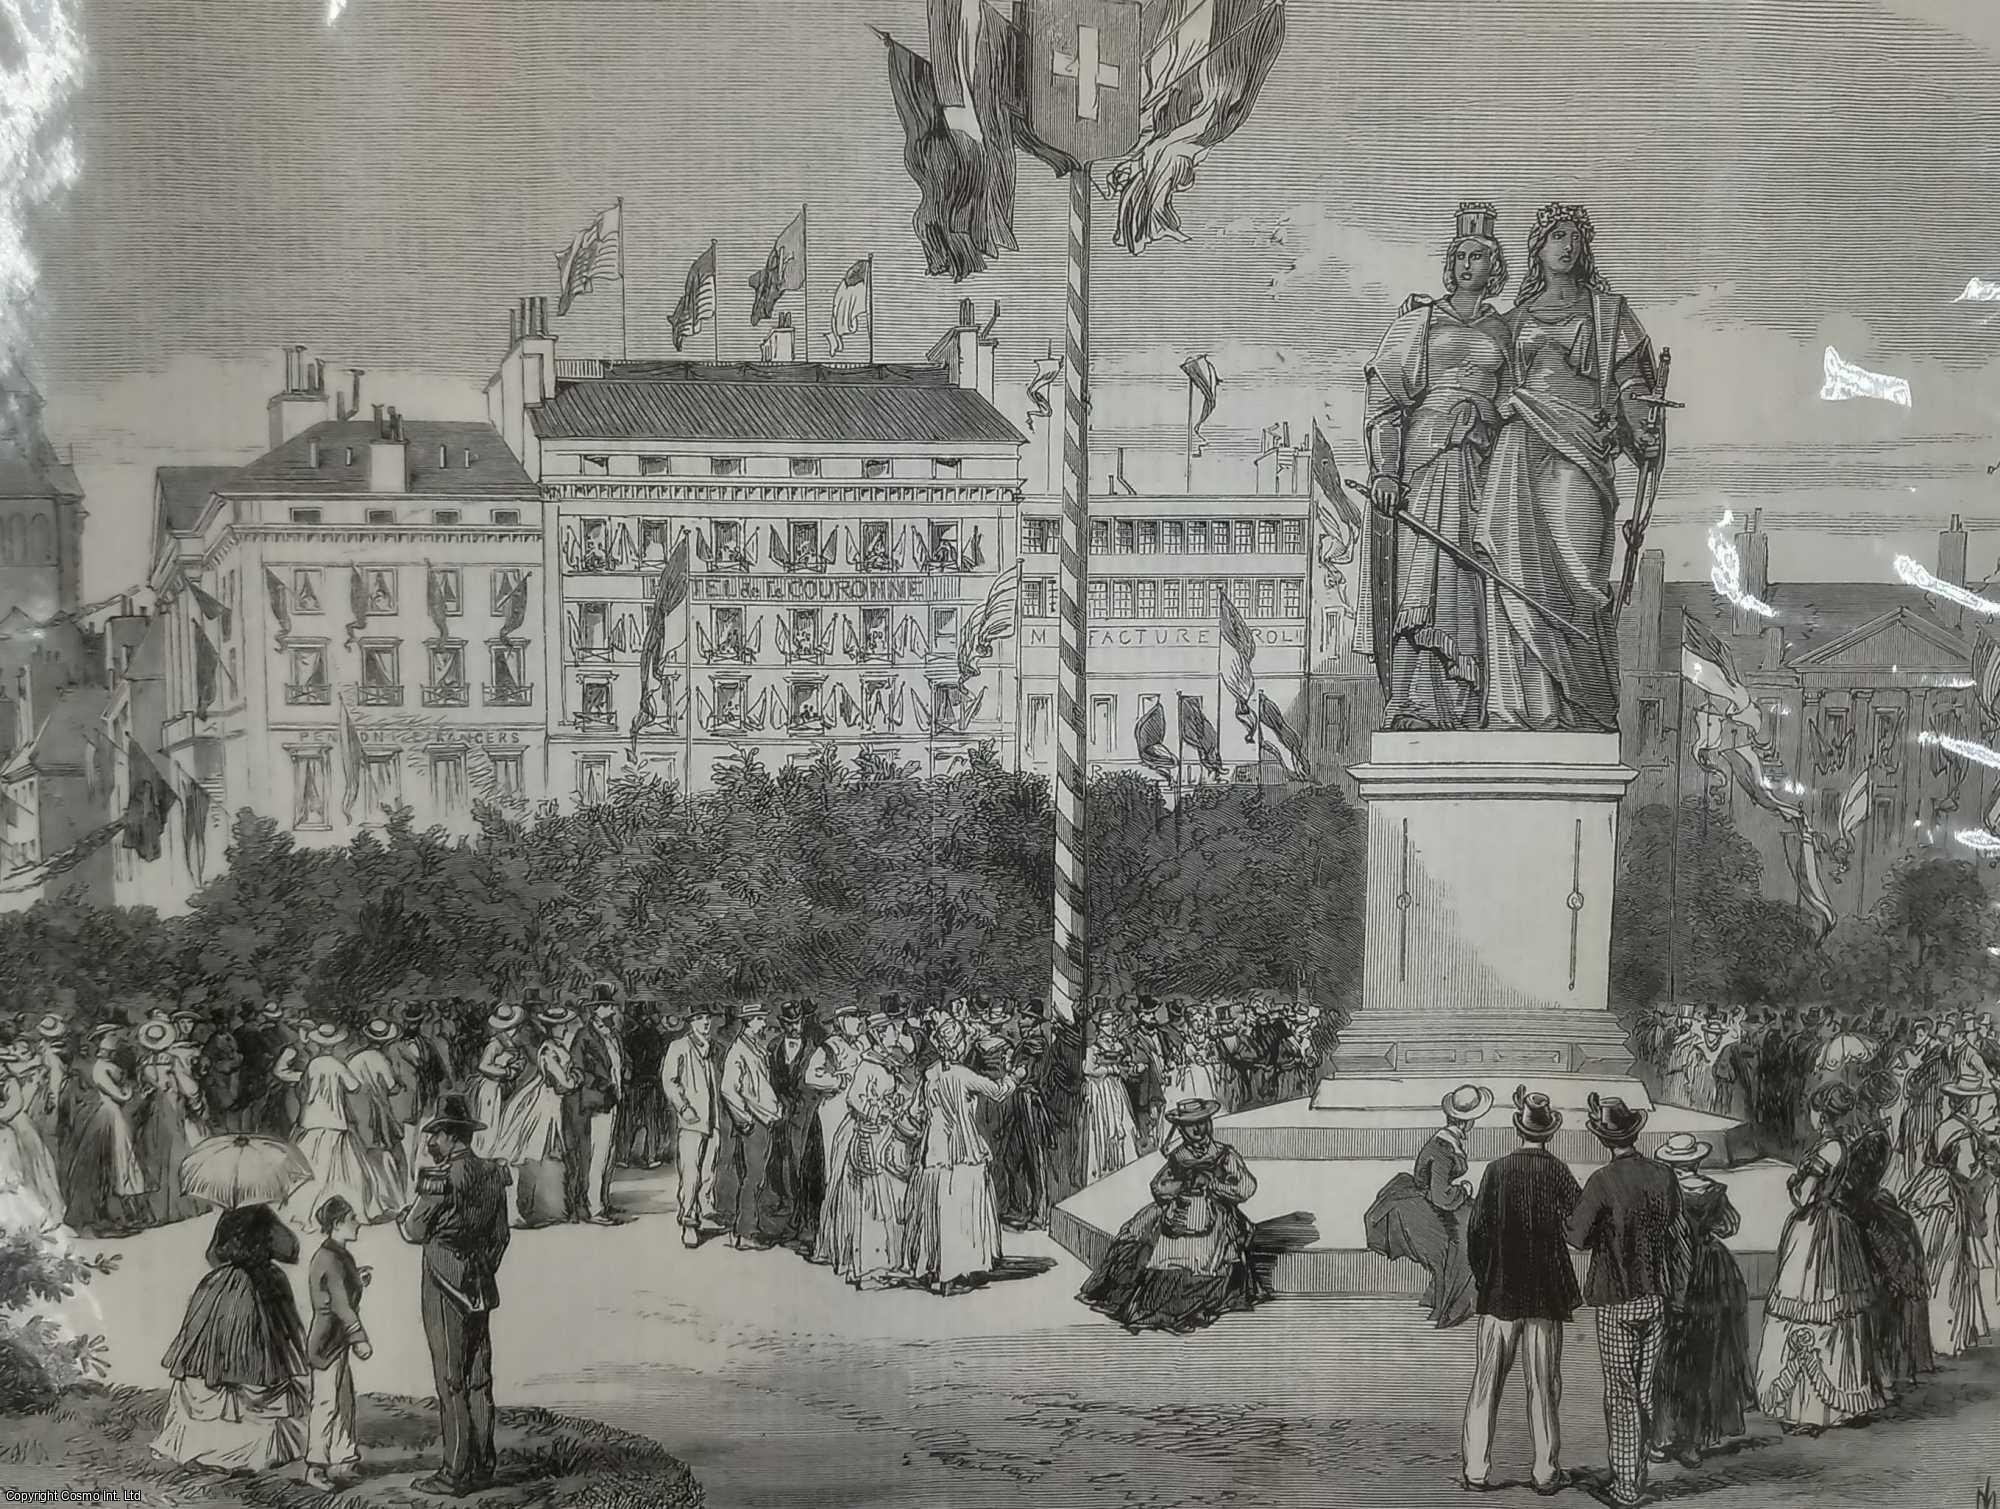 GENEVA - Monument at Geneva of the Union of Geneva with the Swiss Confederation. An original print from the Illustrated London News, 1869.